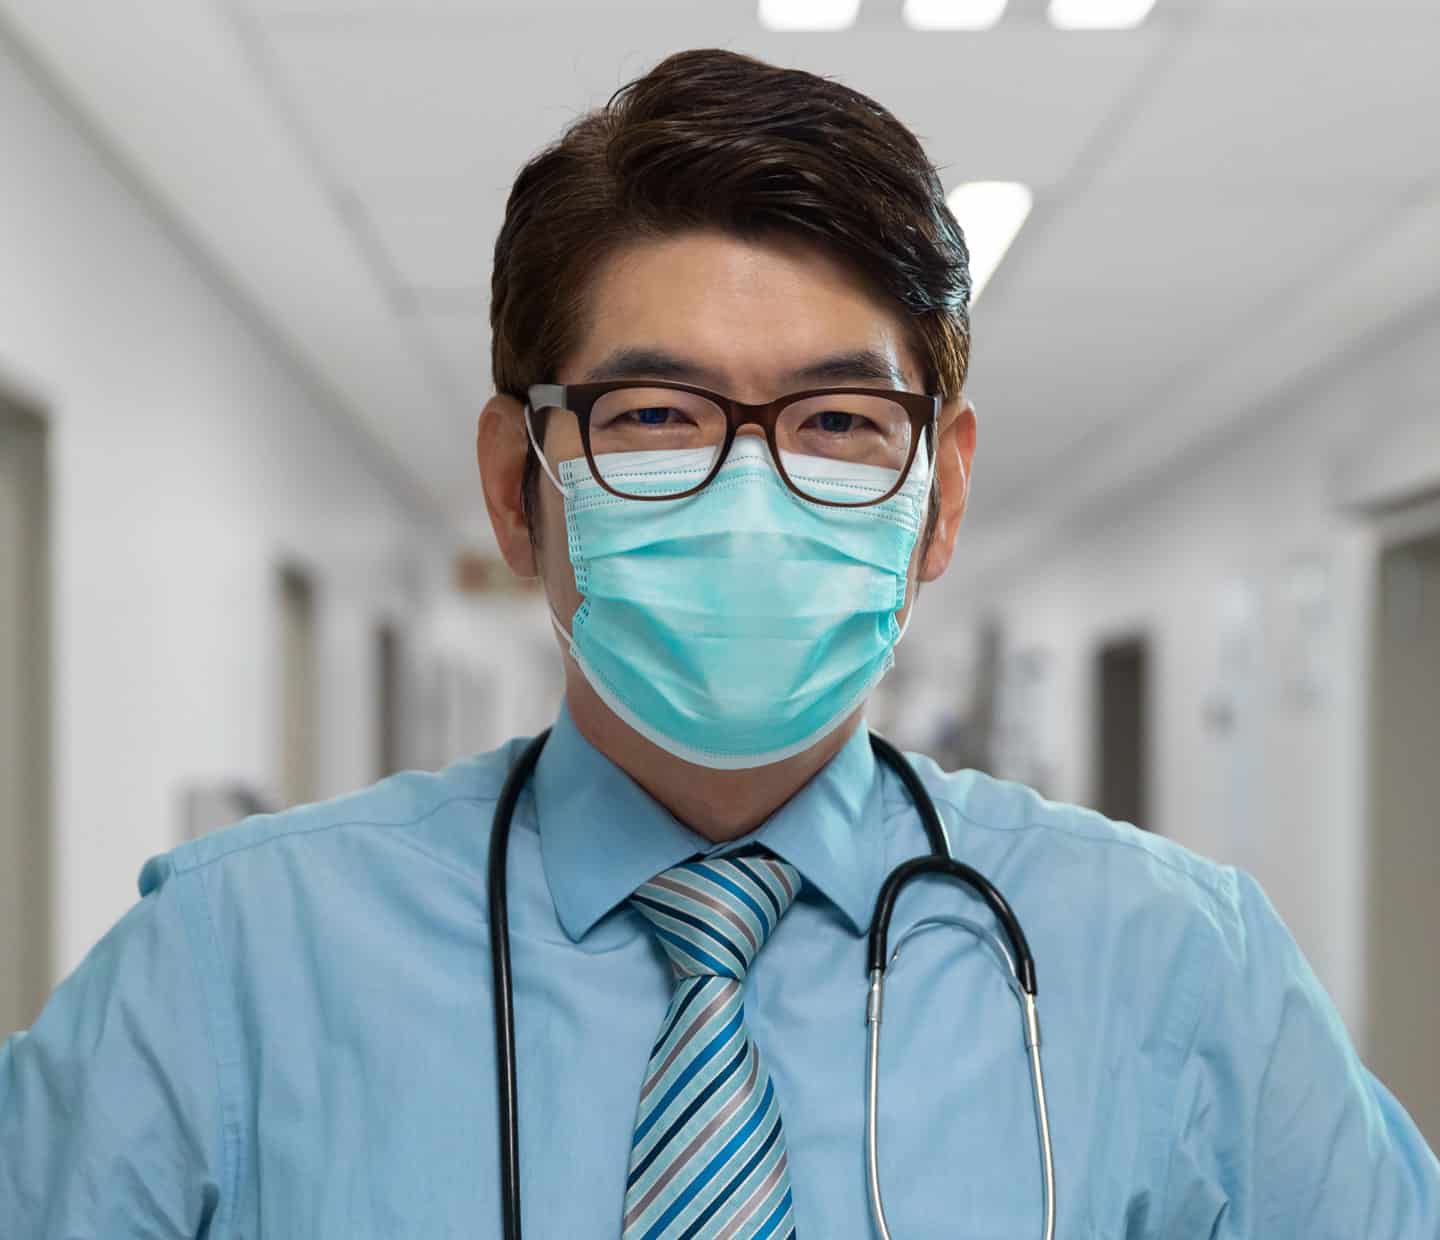 Portrait of mixed race male doctor wearing face mask standing in hospital corridor